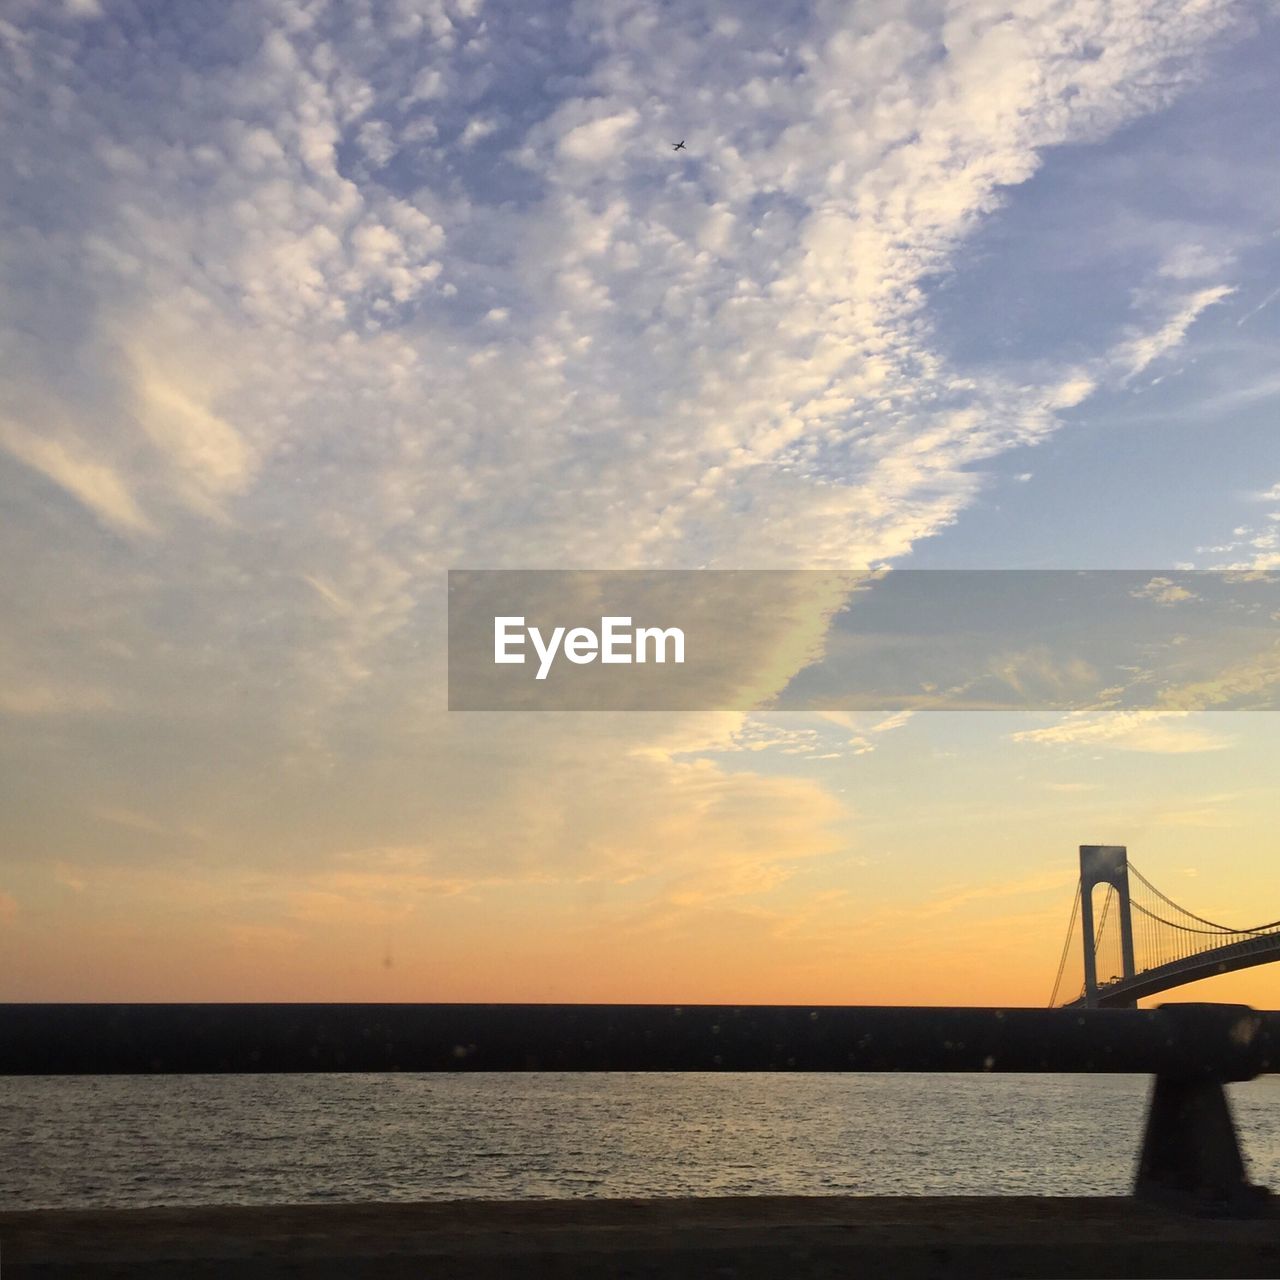 Verrazano-narrows bridge over river against cloudy sky during sunset